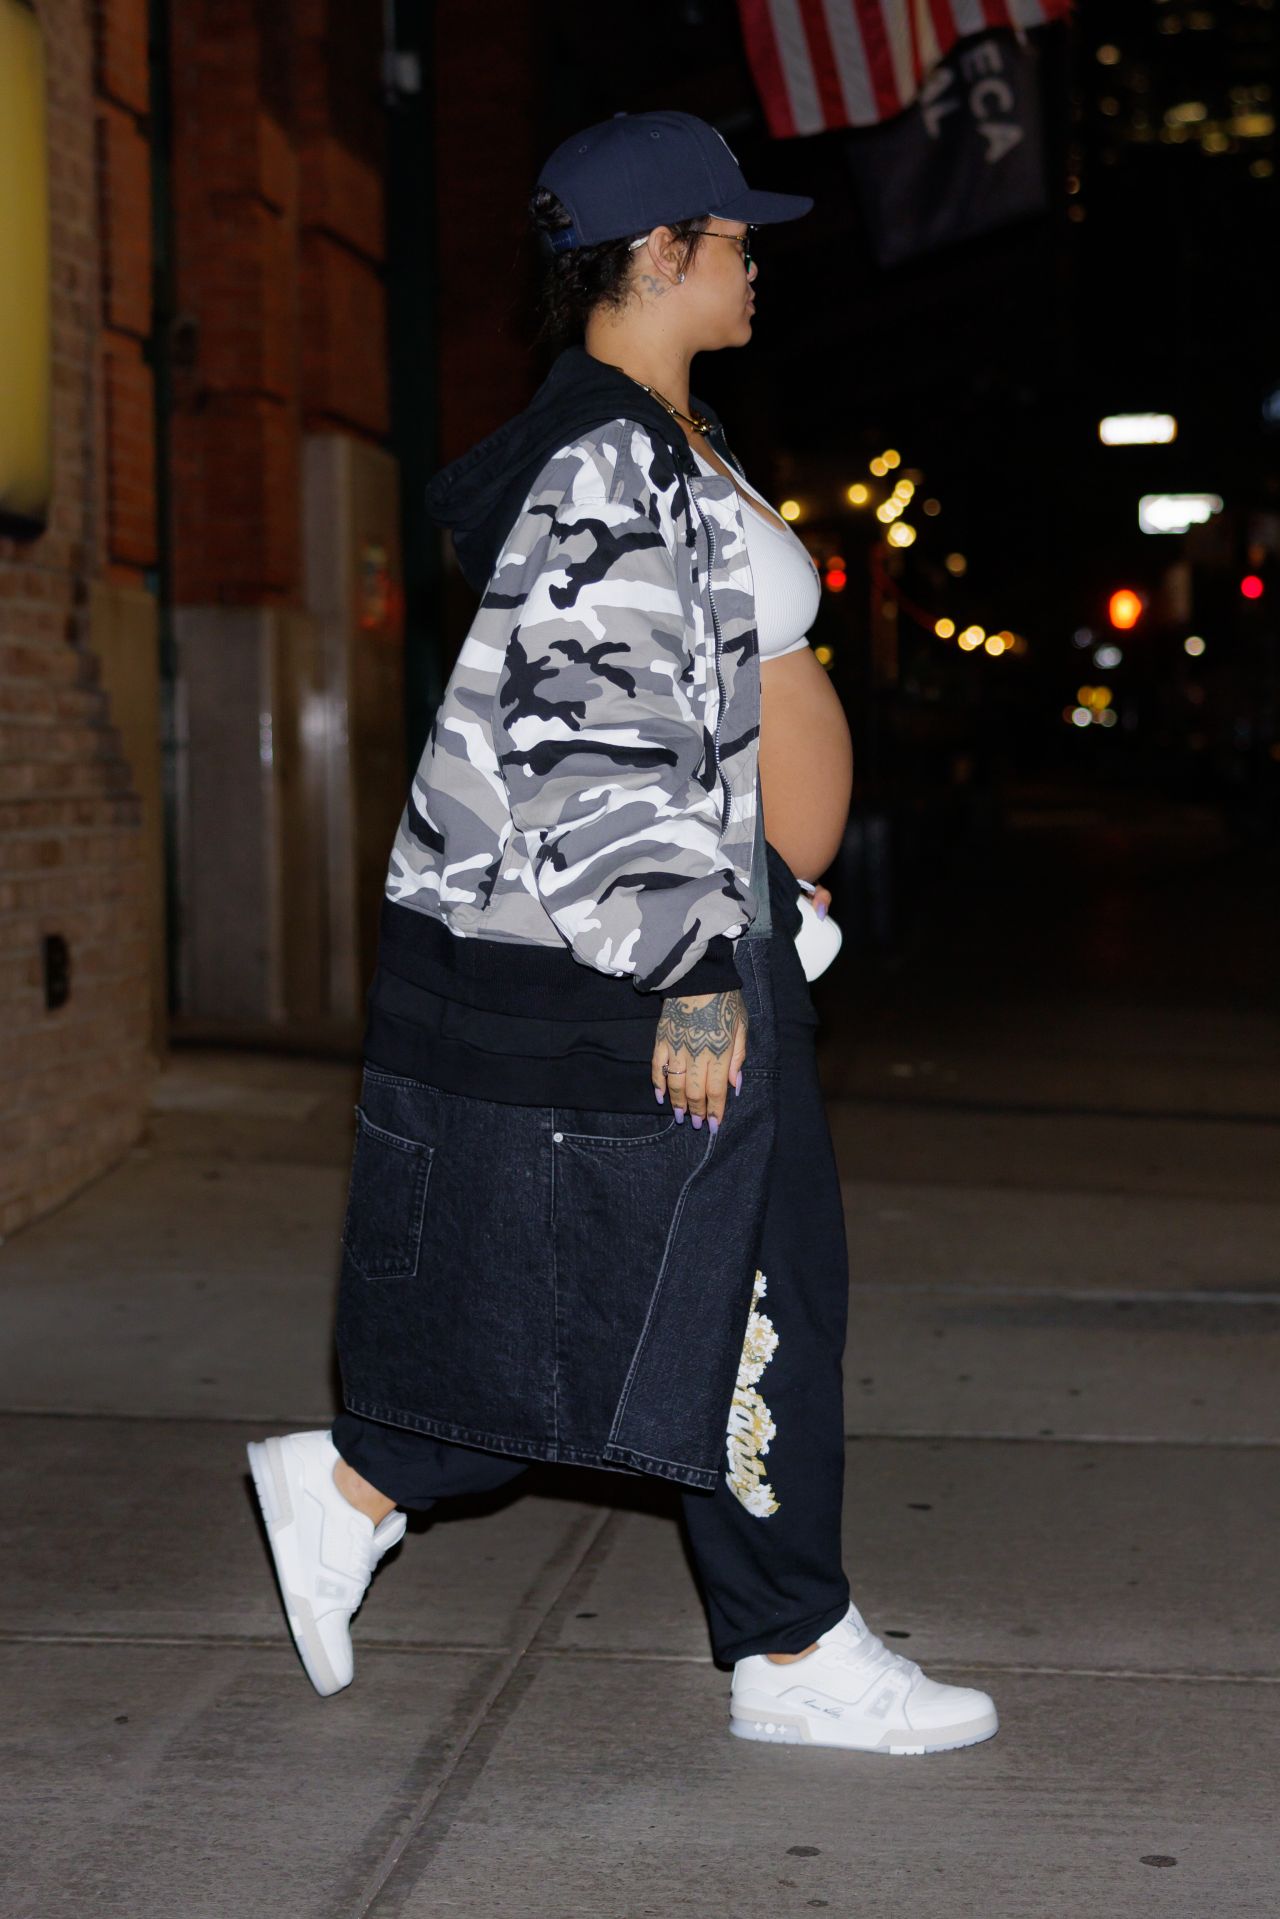 Rihanna Returns to Her Hotel After Day Out in NYC: Photo 4924550